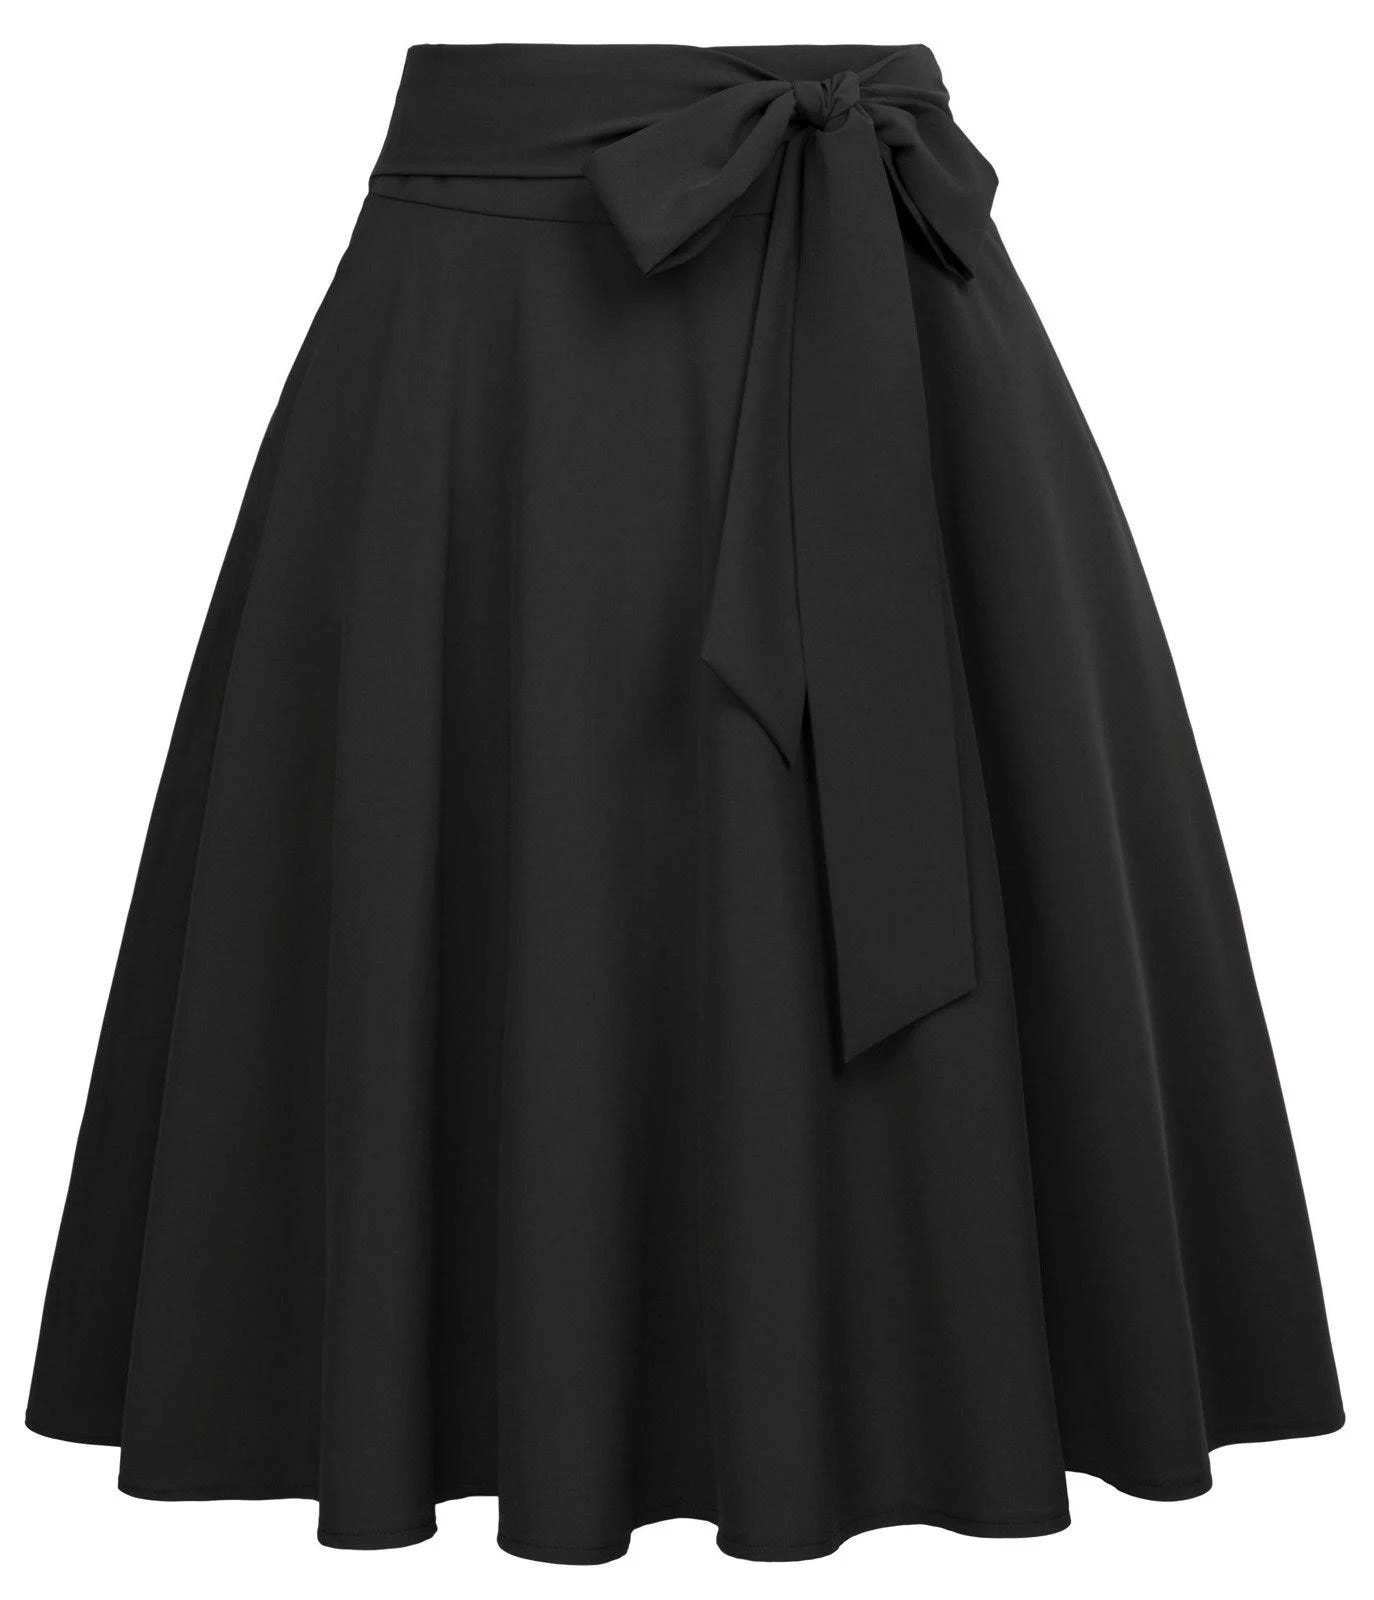 Vintage-Inspired A-Line Skirt with Pleated Pockets | Image